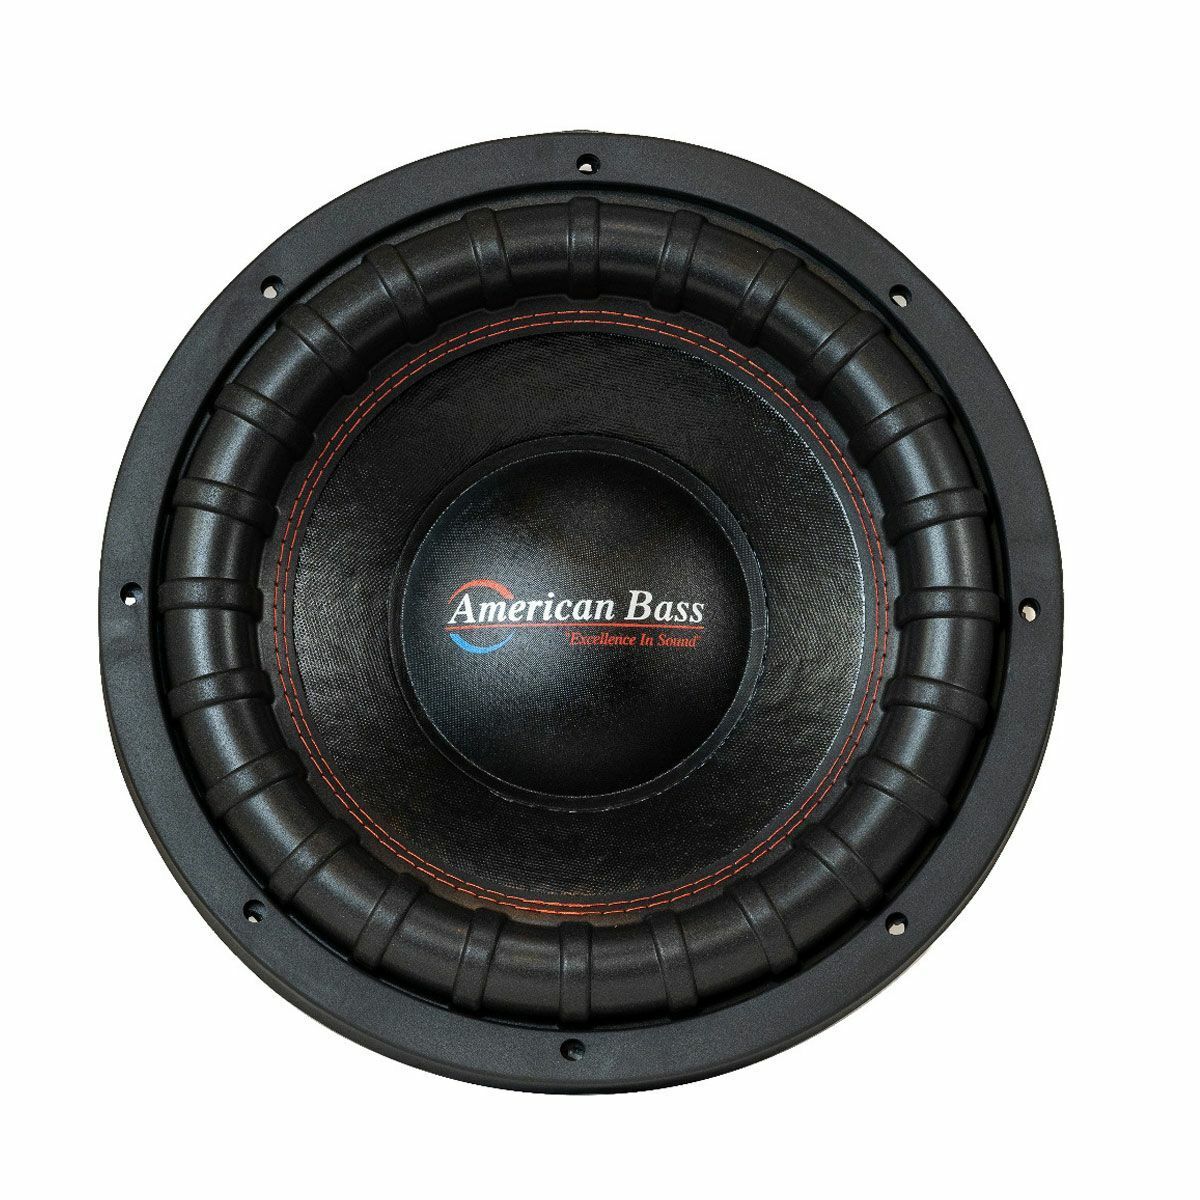 American Bass 15" Subwoofer 2000W 3" 2 Ohm DVC Pro Car Audio XFL-15-D2 New - image 1 of 4